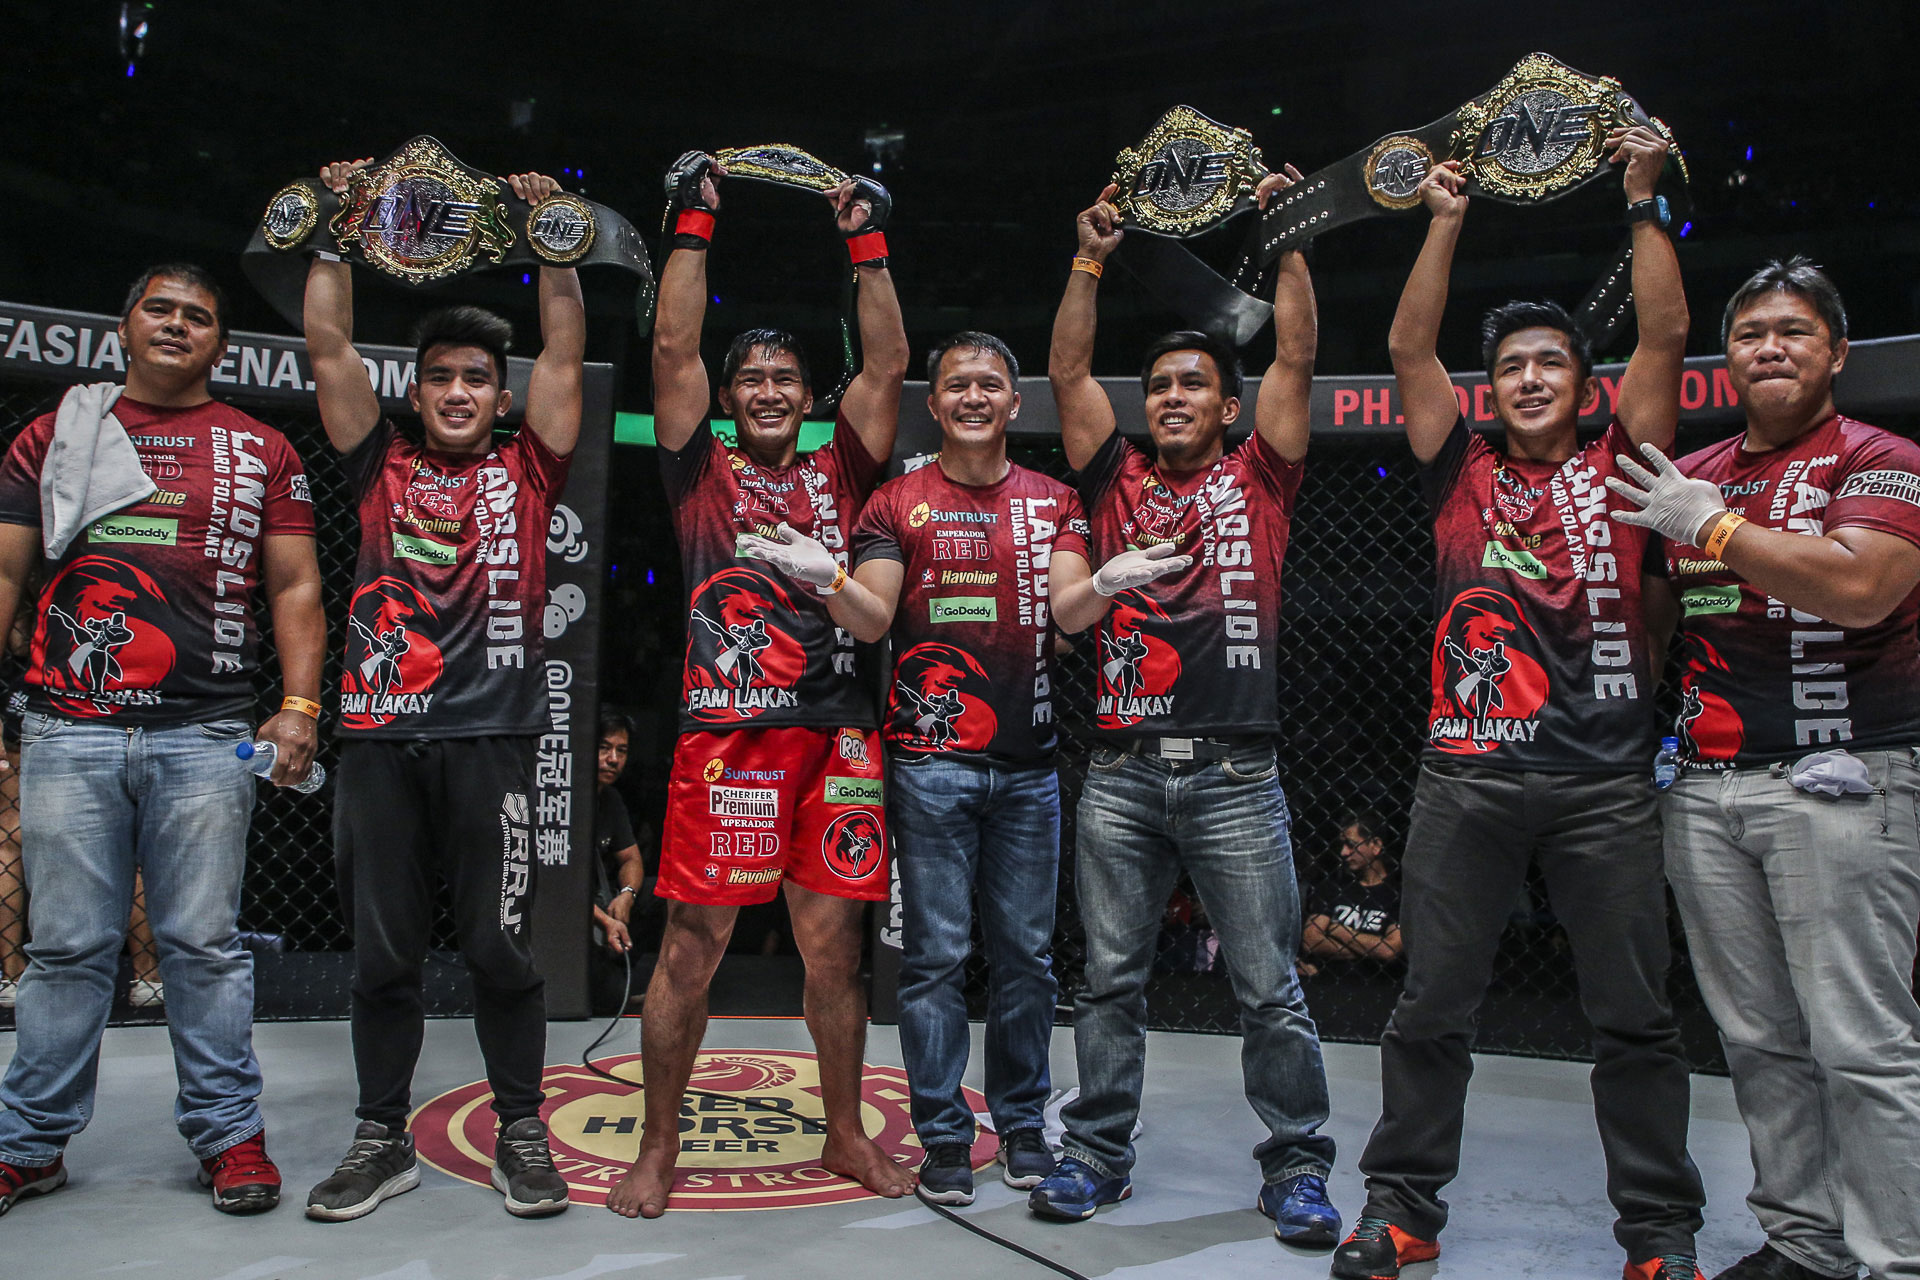 ONE-Conquest-of-Champions-Team-Lakay Eduard Folayang leaves Team Lakay Mixed Martial Arts News ONE Championship  - philippine sports news